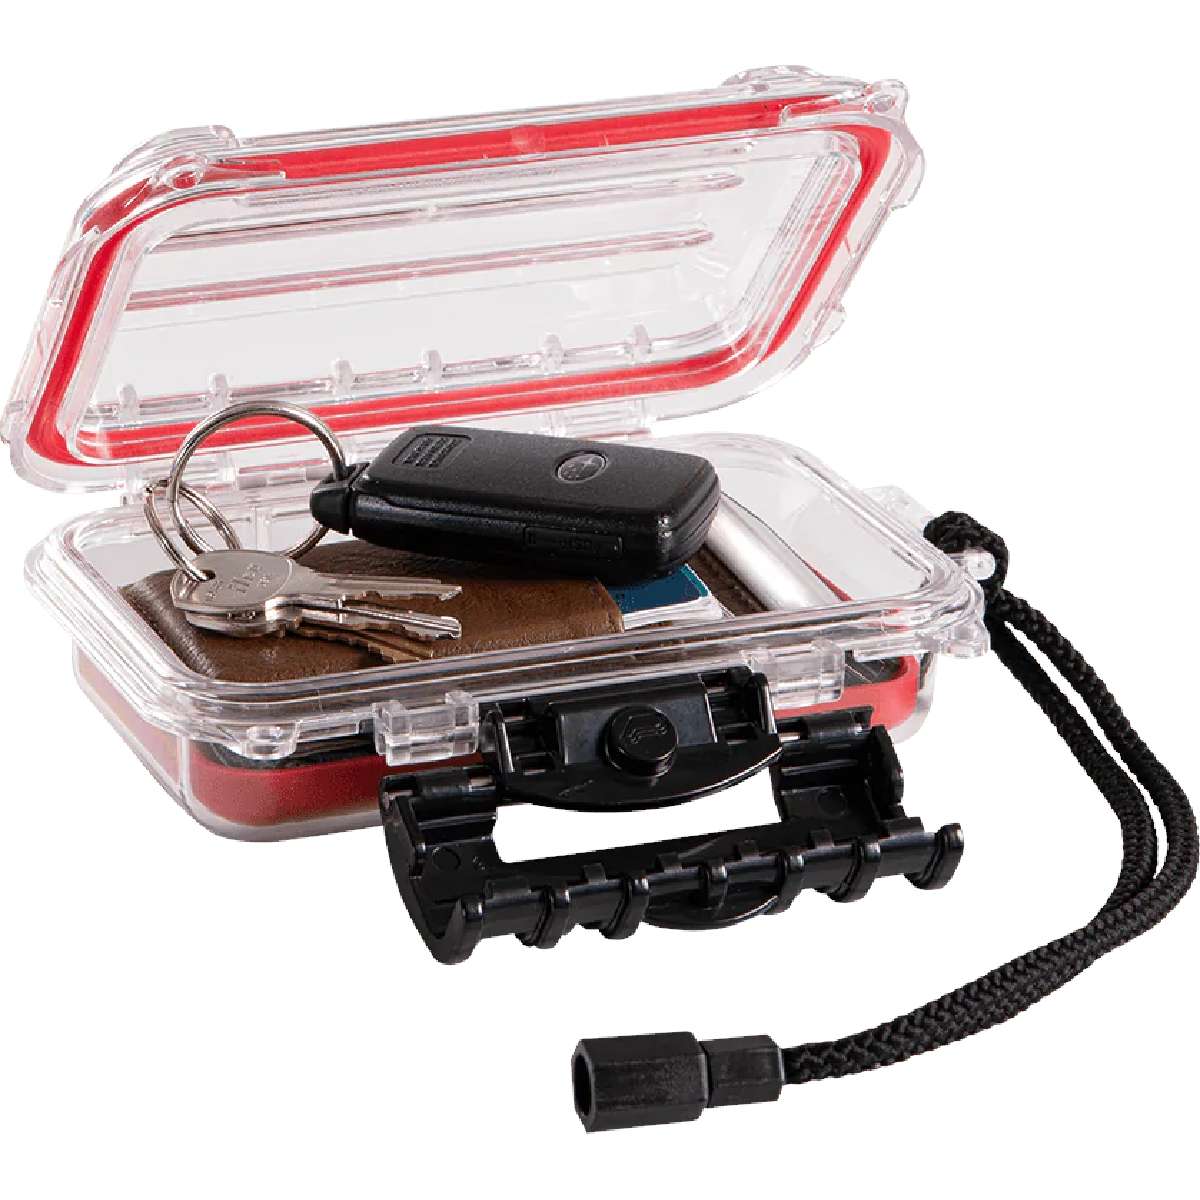 Plano Guide Series Waterproof Case X-Small - TackleDirect